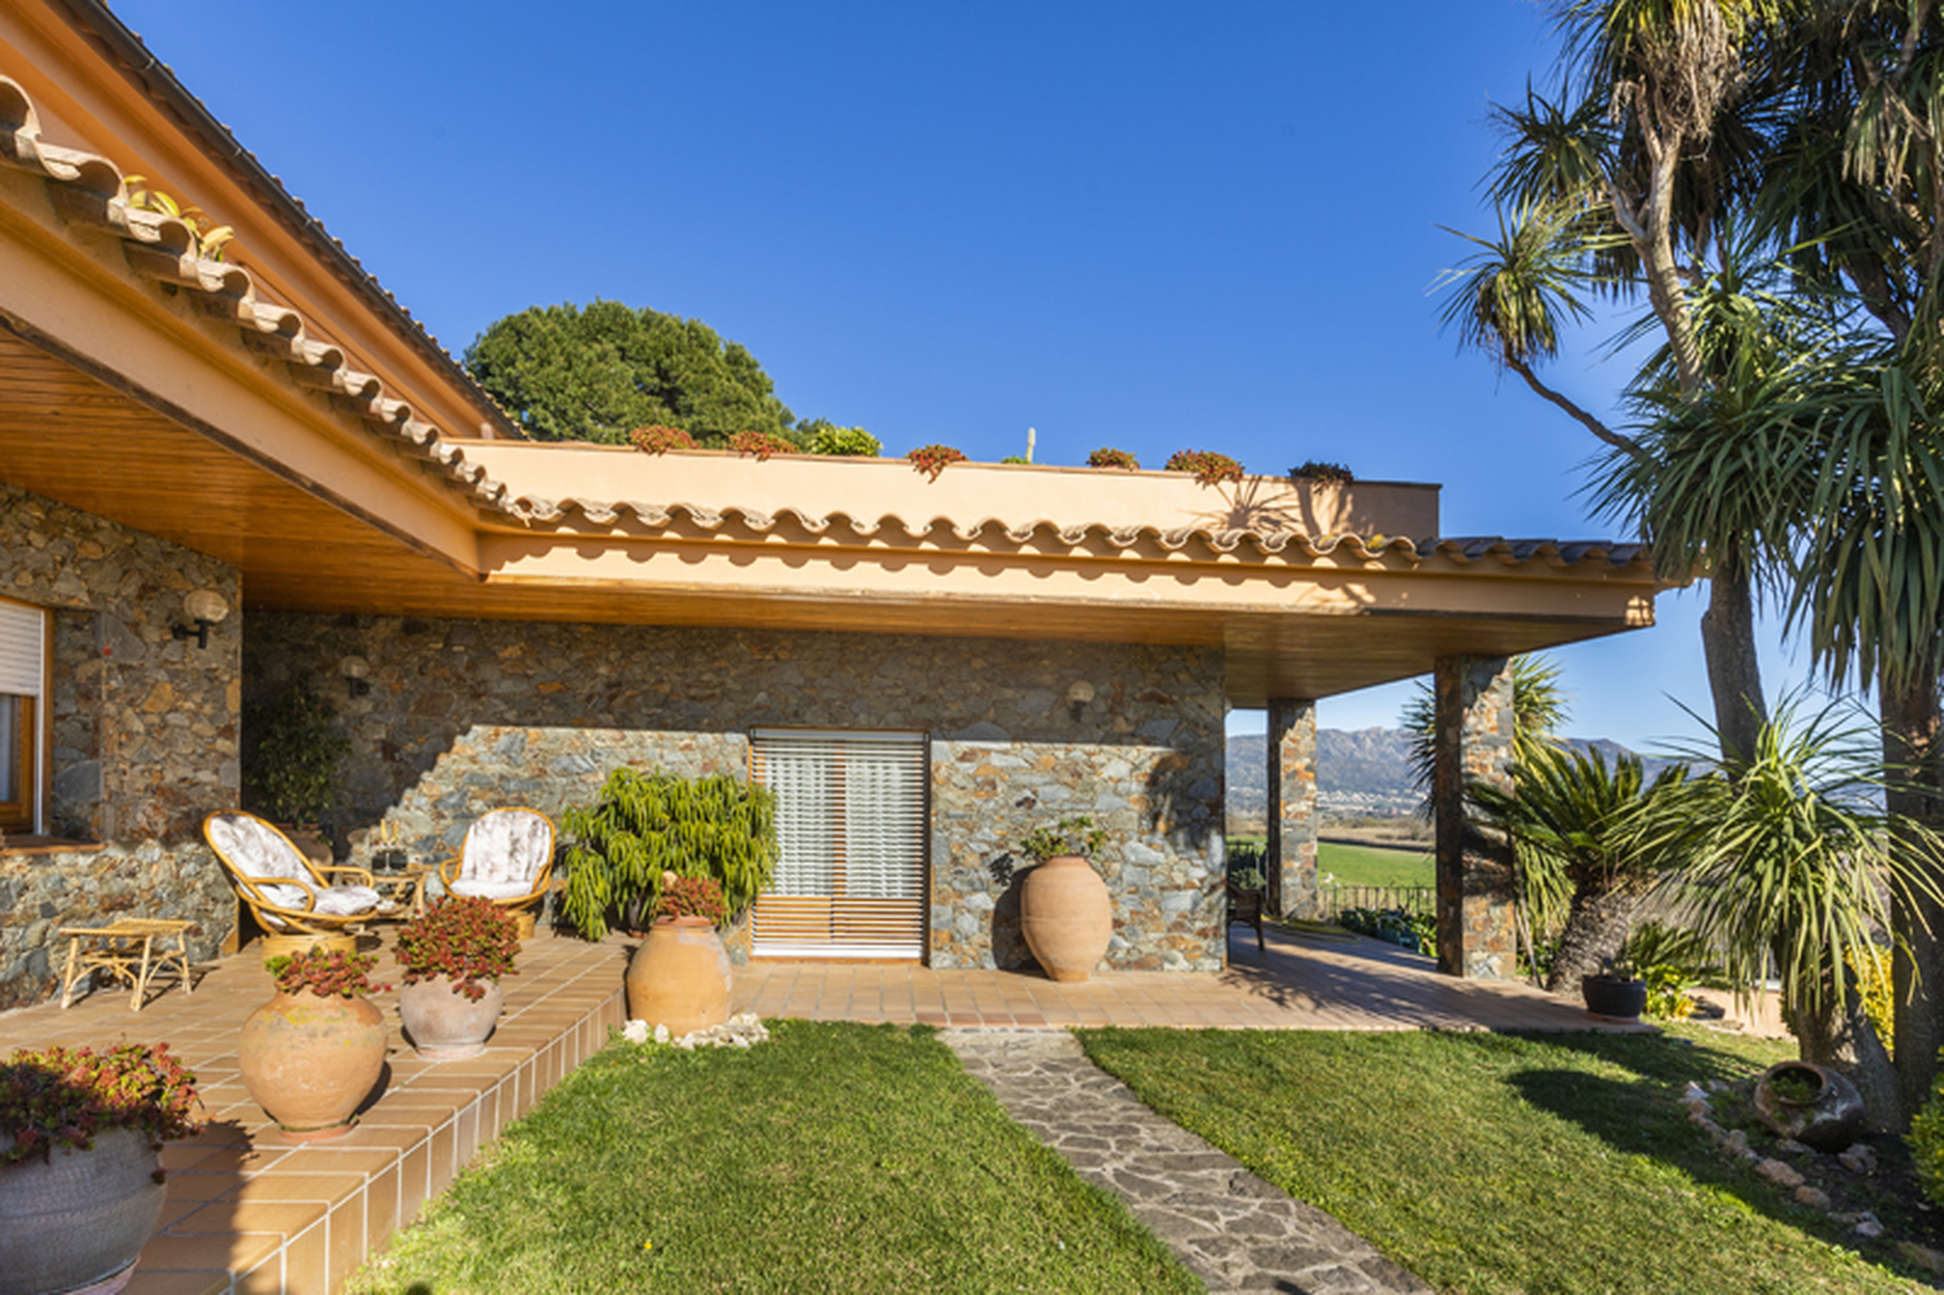 Near to Peralada, house for sale with panoramic views